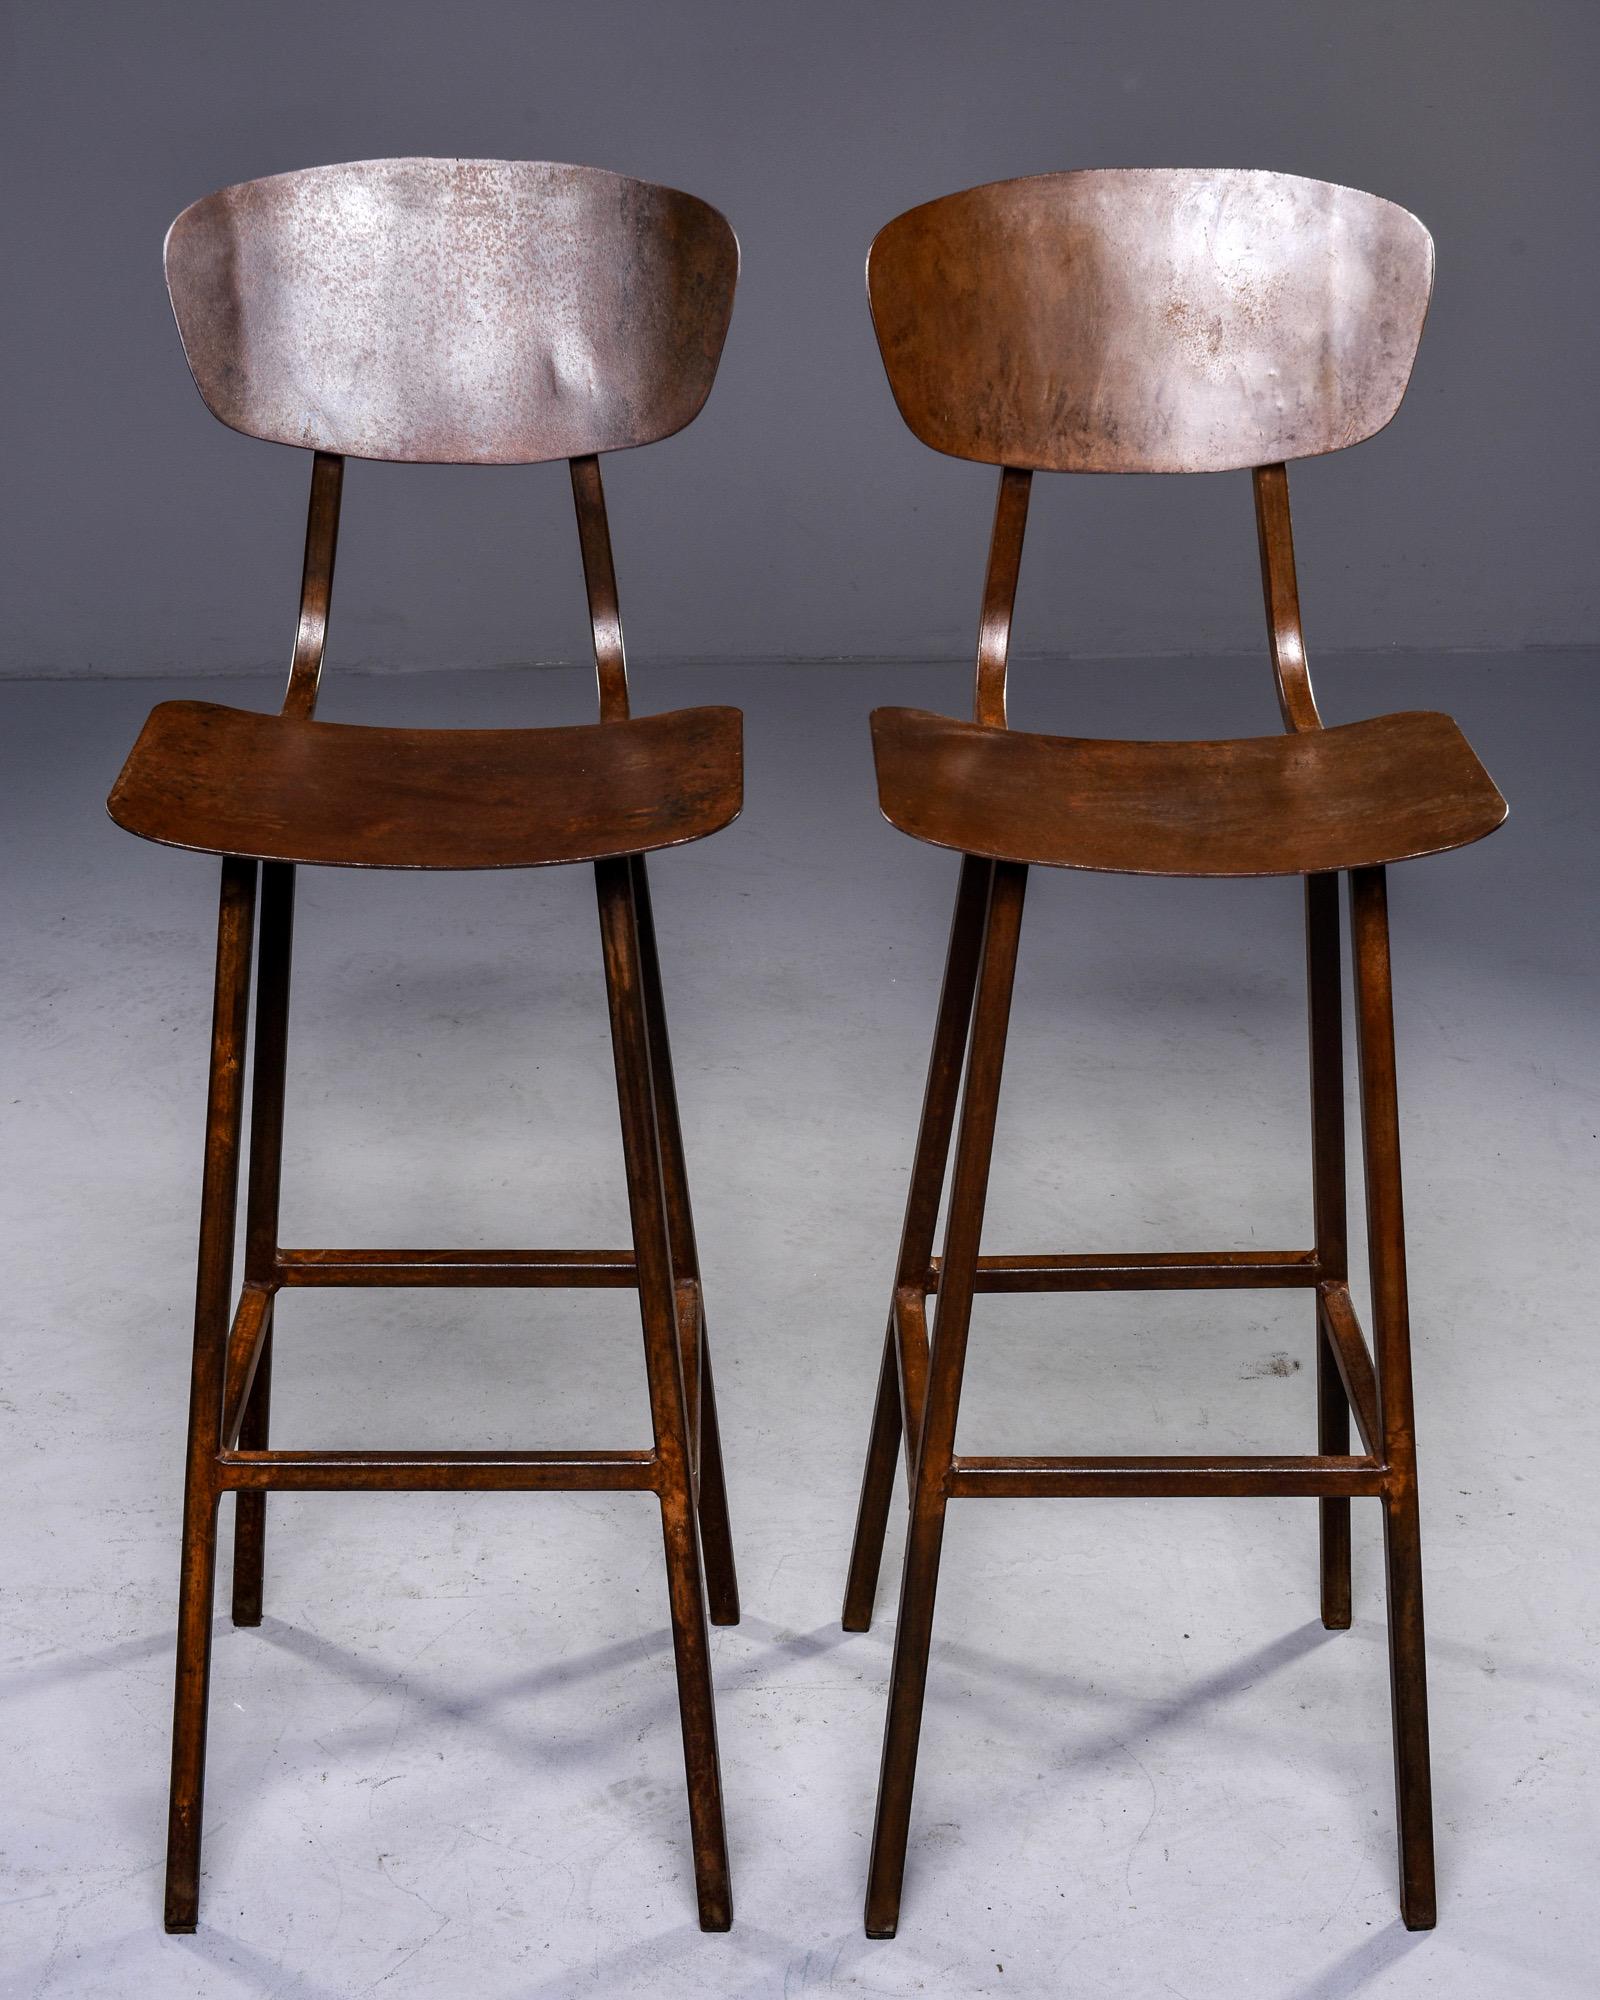 Sold individually, these circa 1940s bar height industrial stools were found in England and are made of welded iron and have a rusty brown colored finish. 

Measures: Seat height: 28.75 to 29”, seat depth: 11”, seat width: 14.75”.